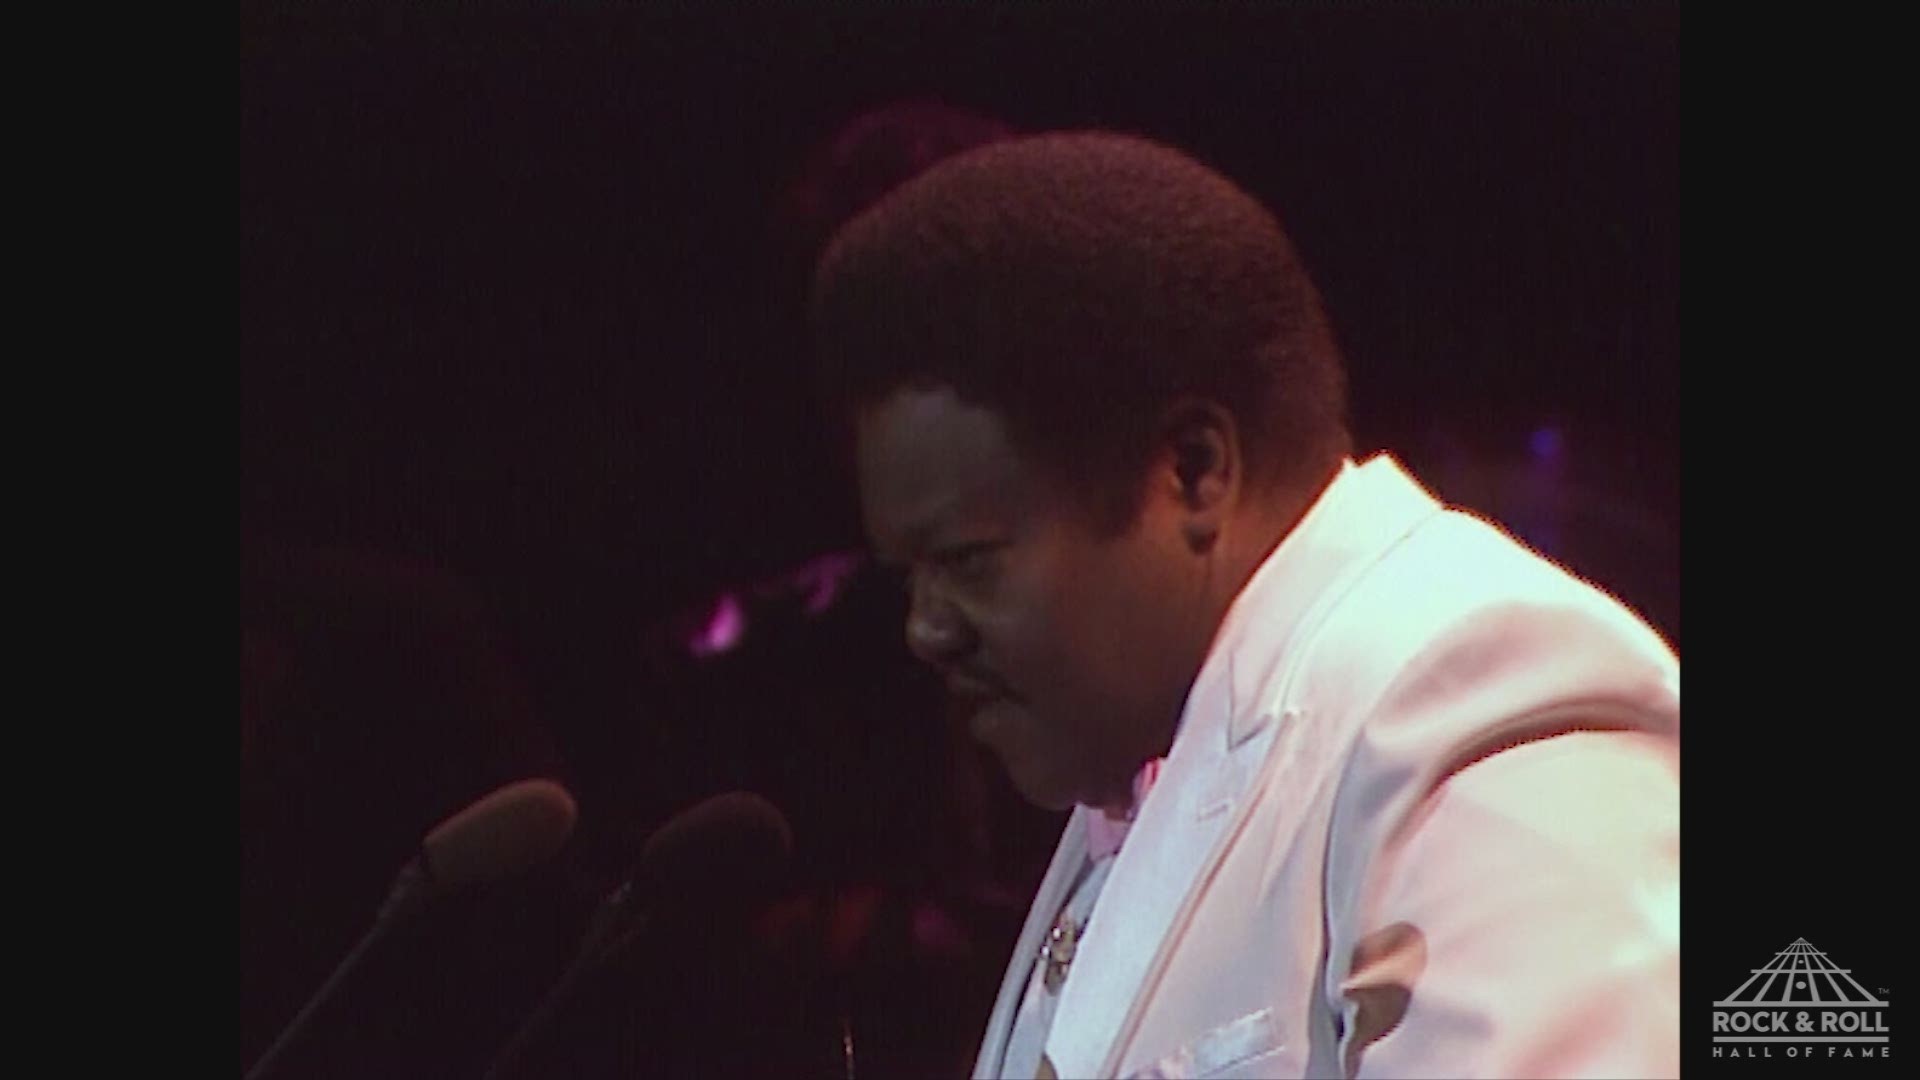 Fats Domino inducted into Rock and Roll Hall of Fame in 1986